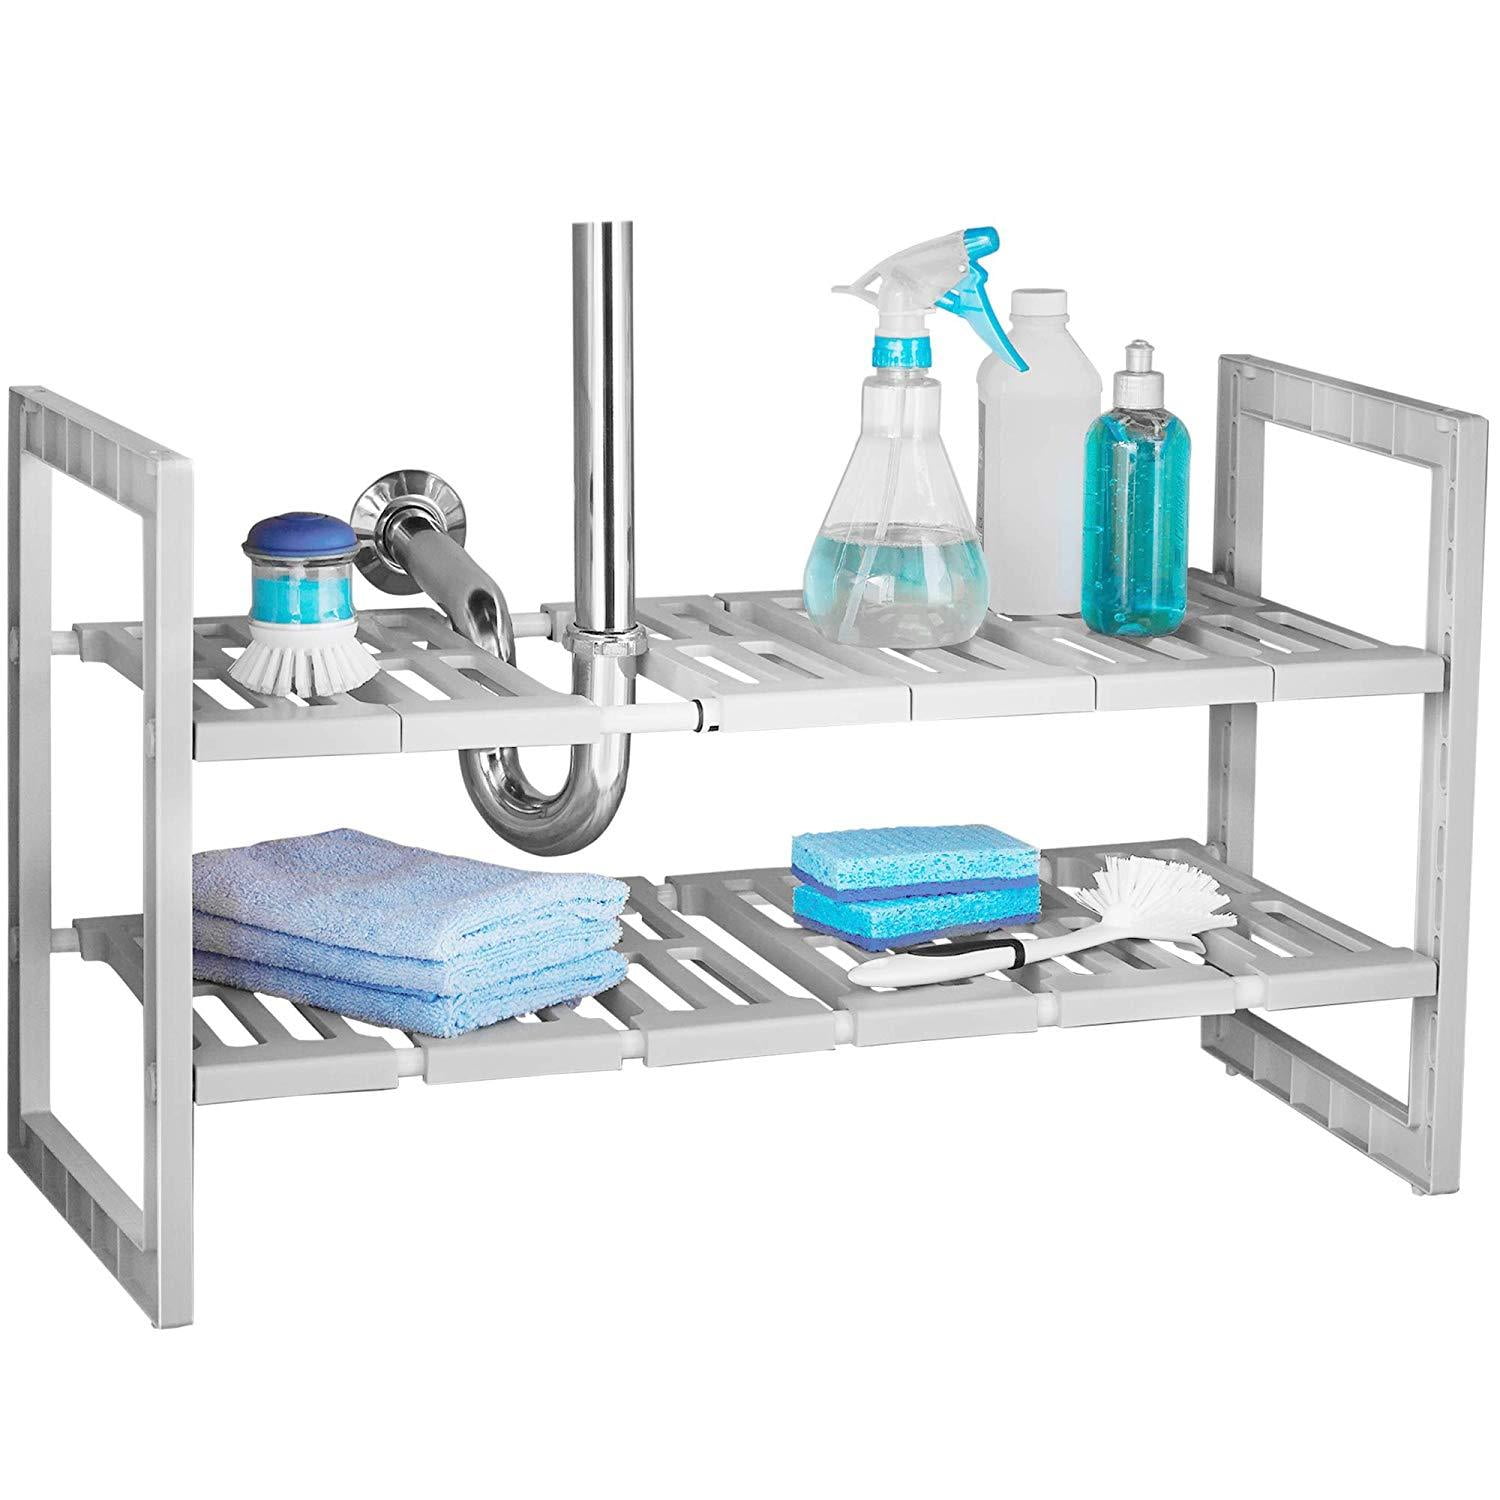 Venoly Home - Under Sink 2 Tier Expandable Shelf Organizer Rack, Silver -  Expands from 18 Inches to 30 Inches